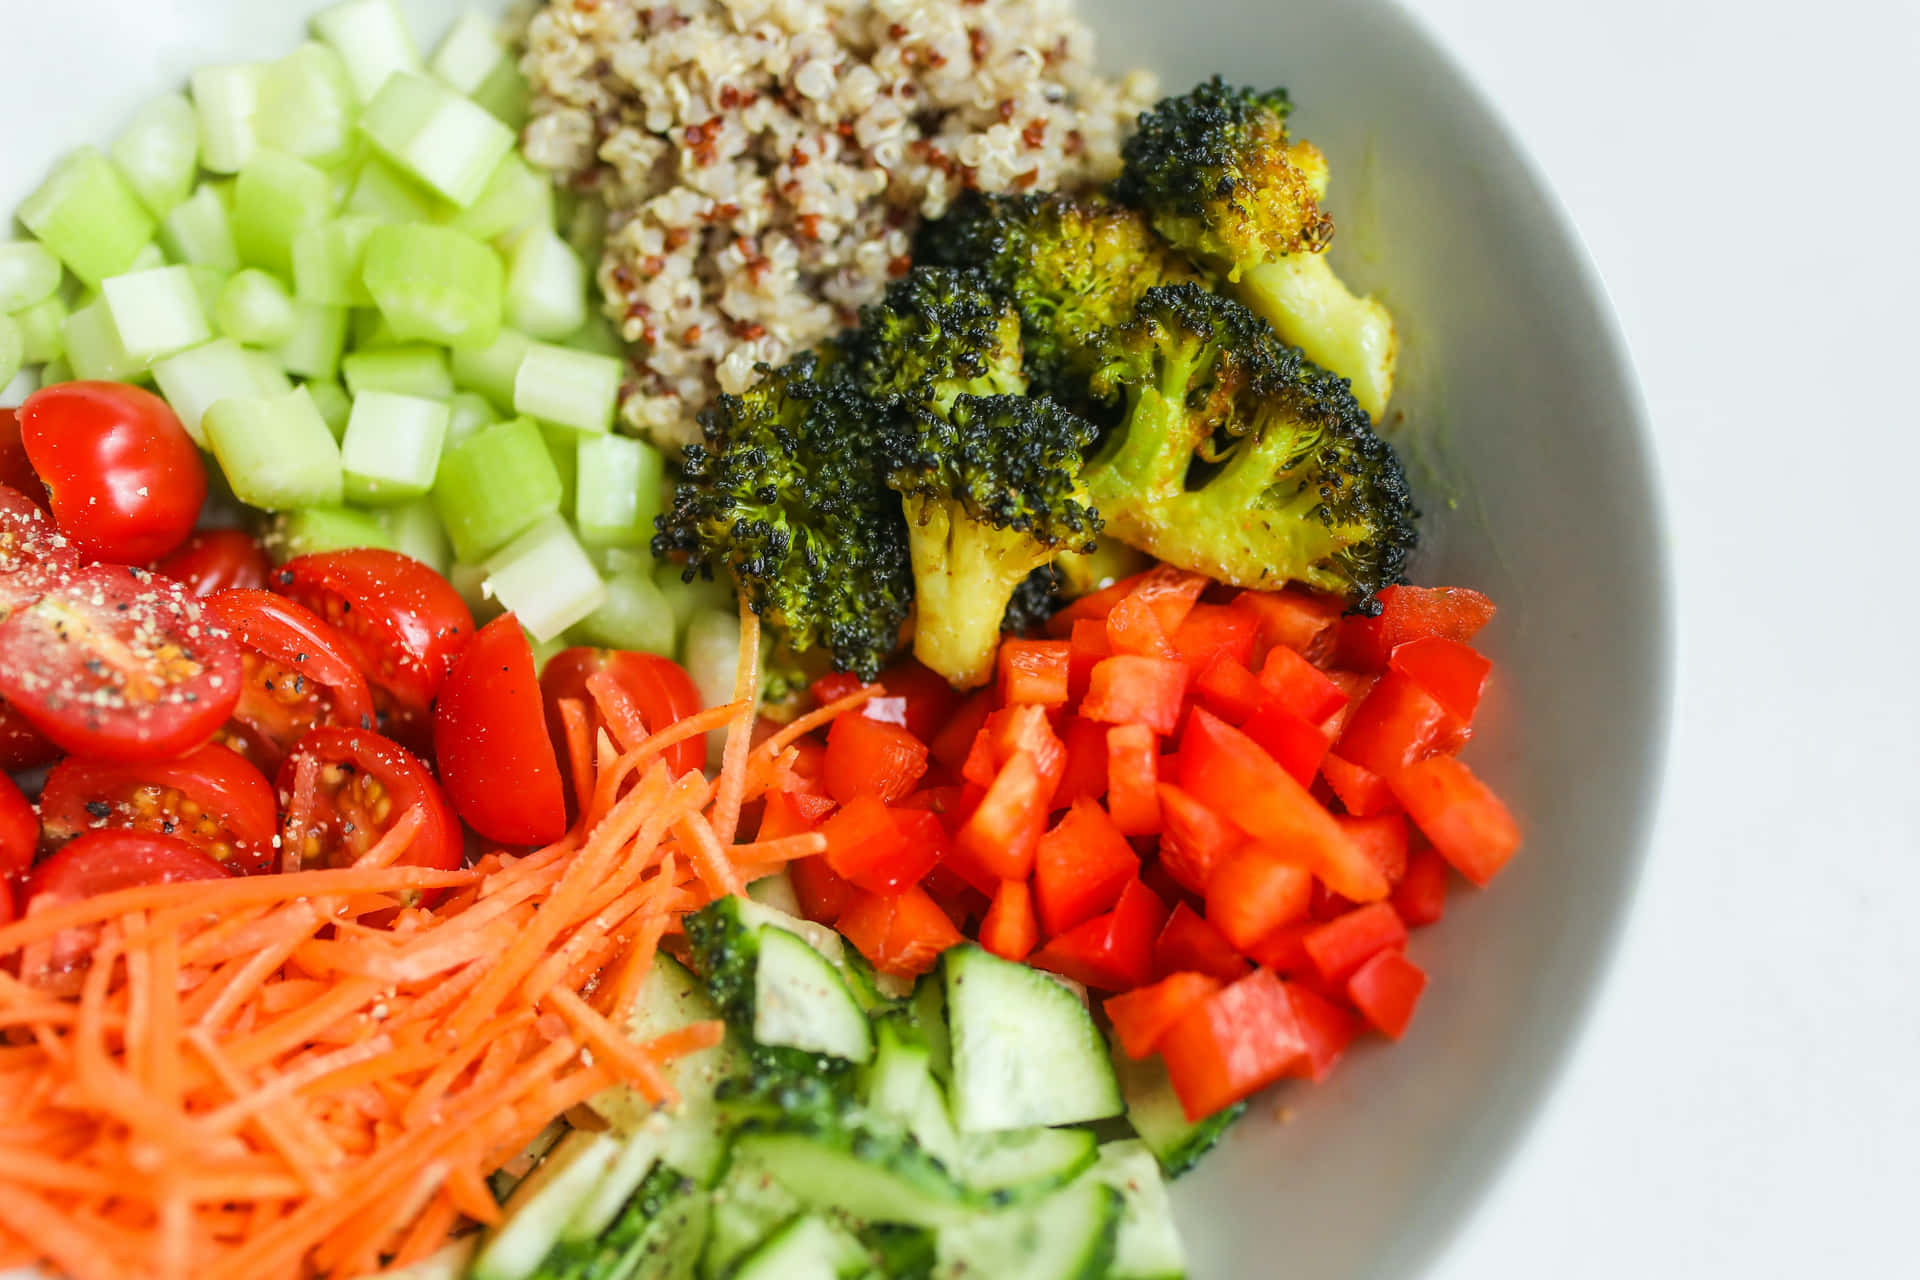 Start your day off with a nourishing and colorful salad